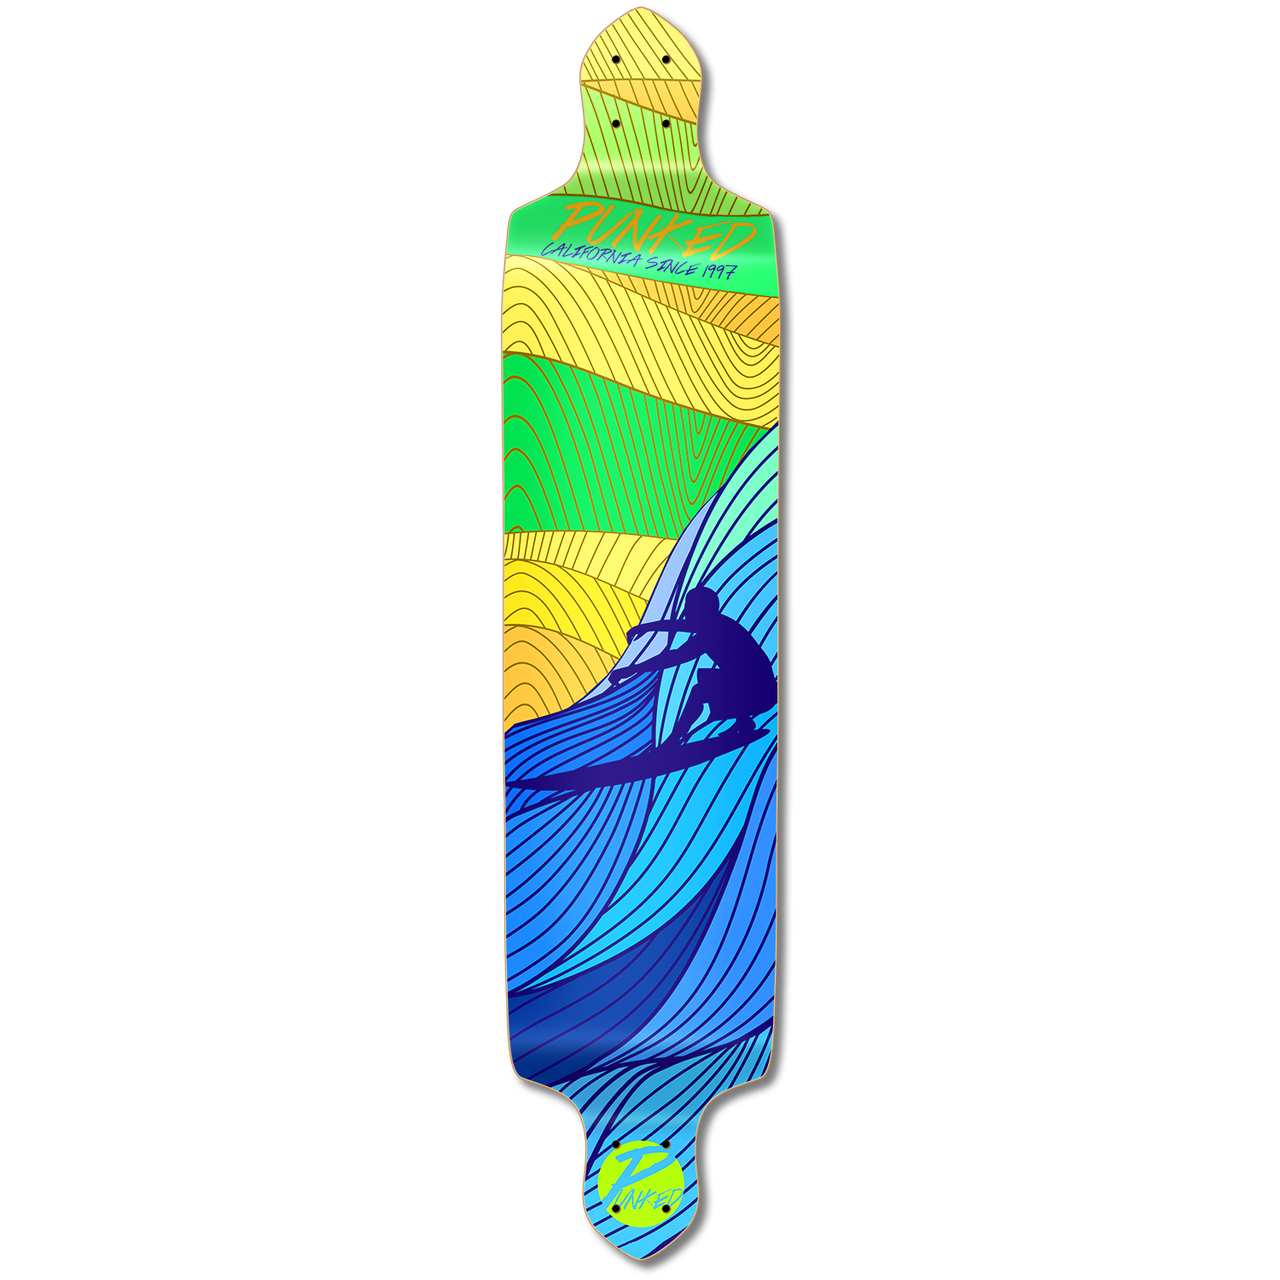 Yocaher Drop Down Longboard Deck - Surf's up